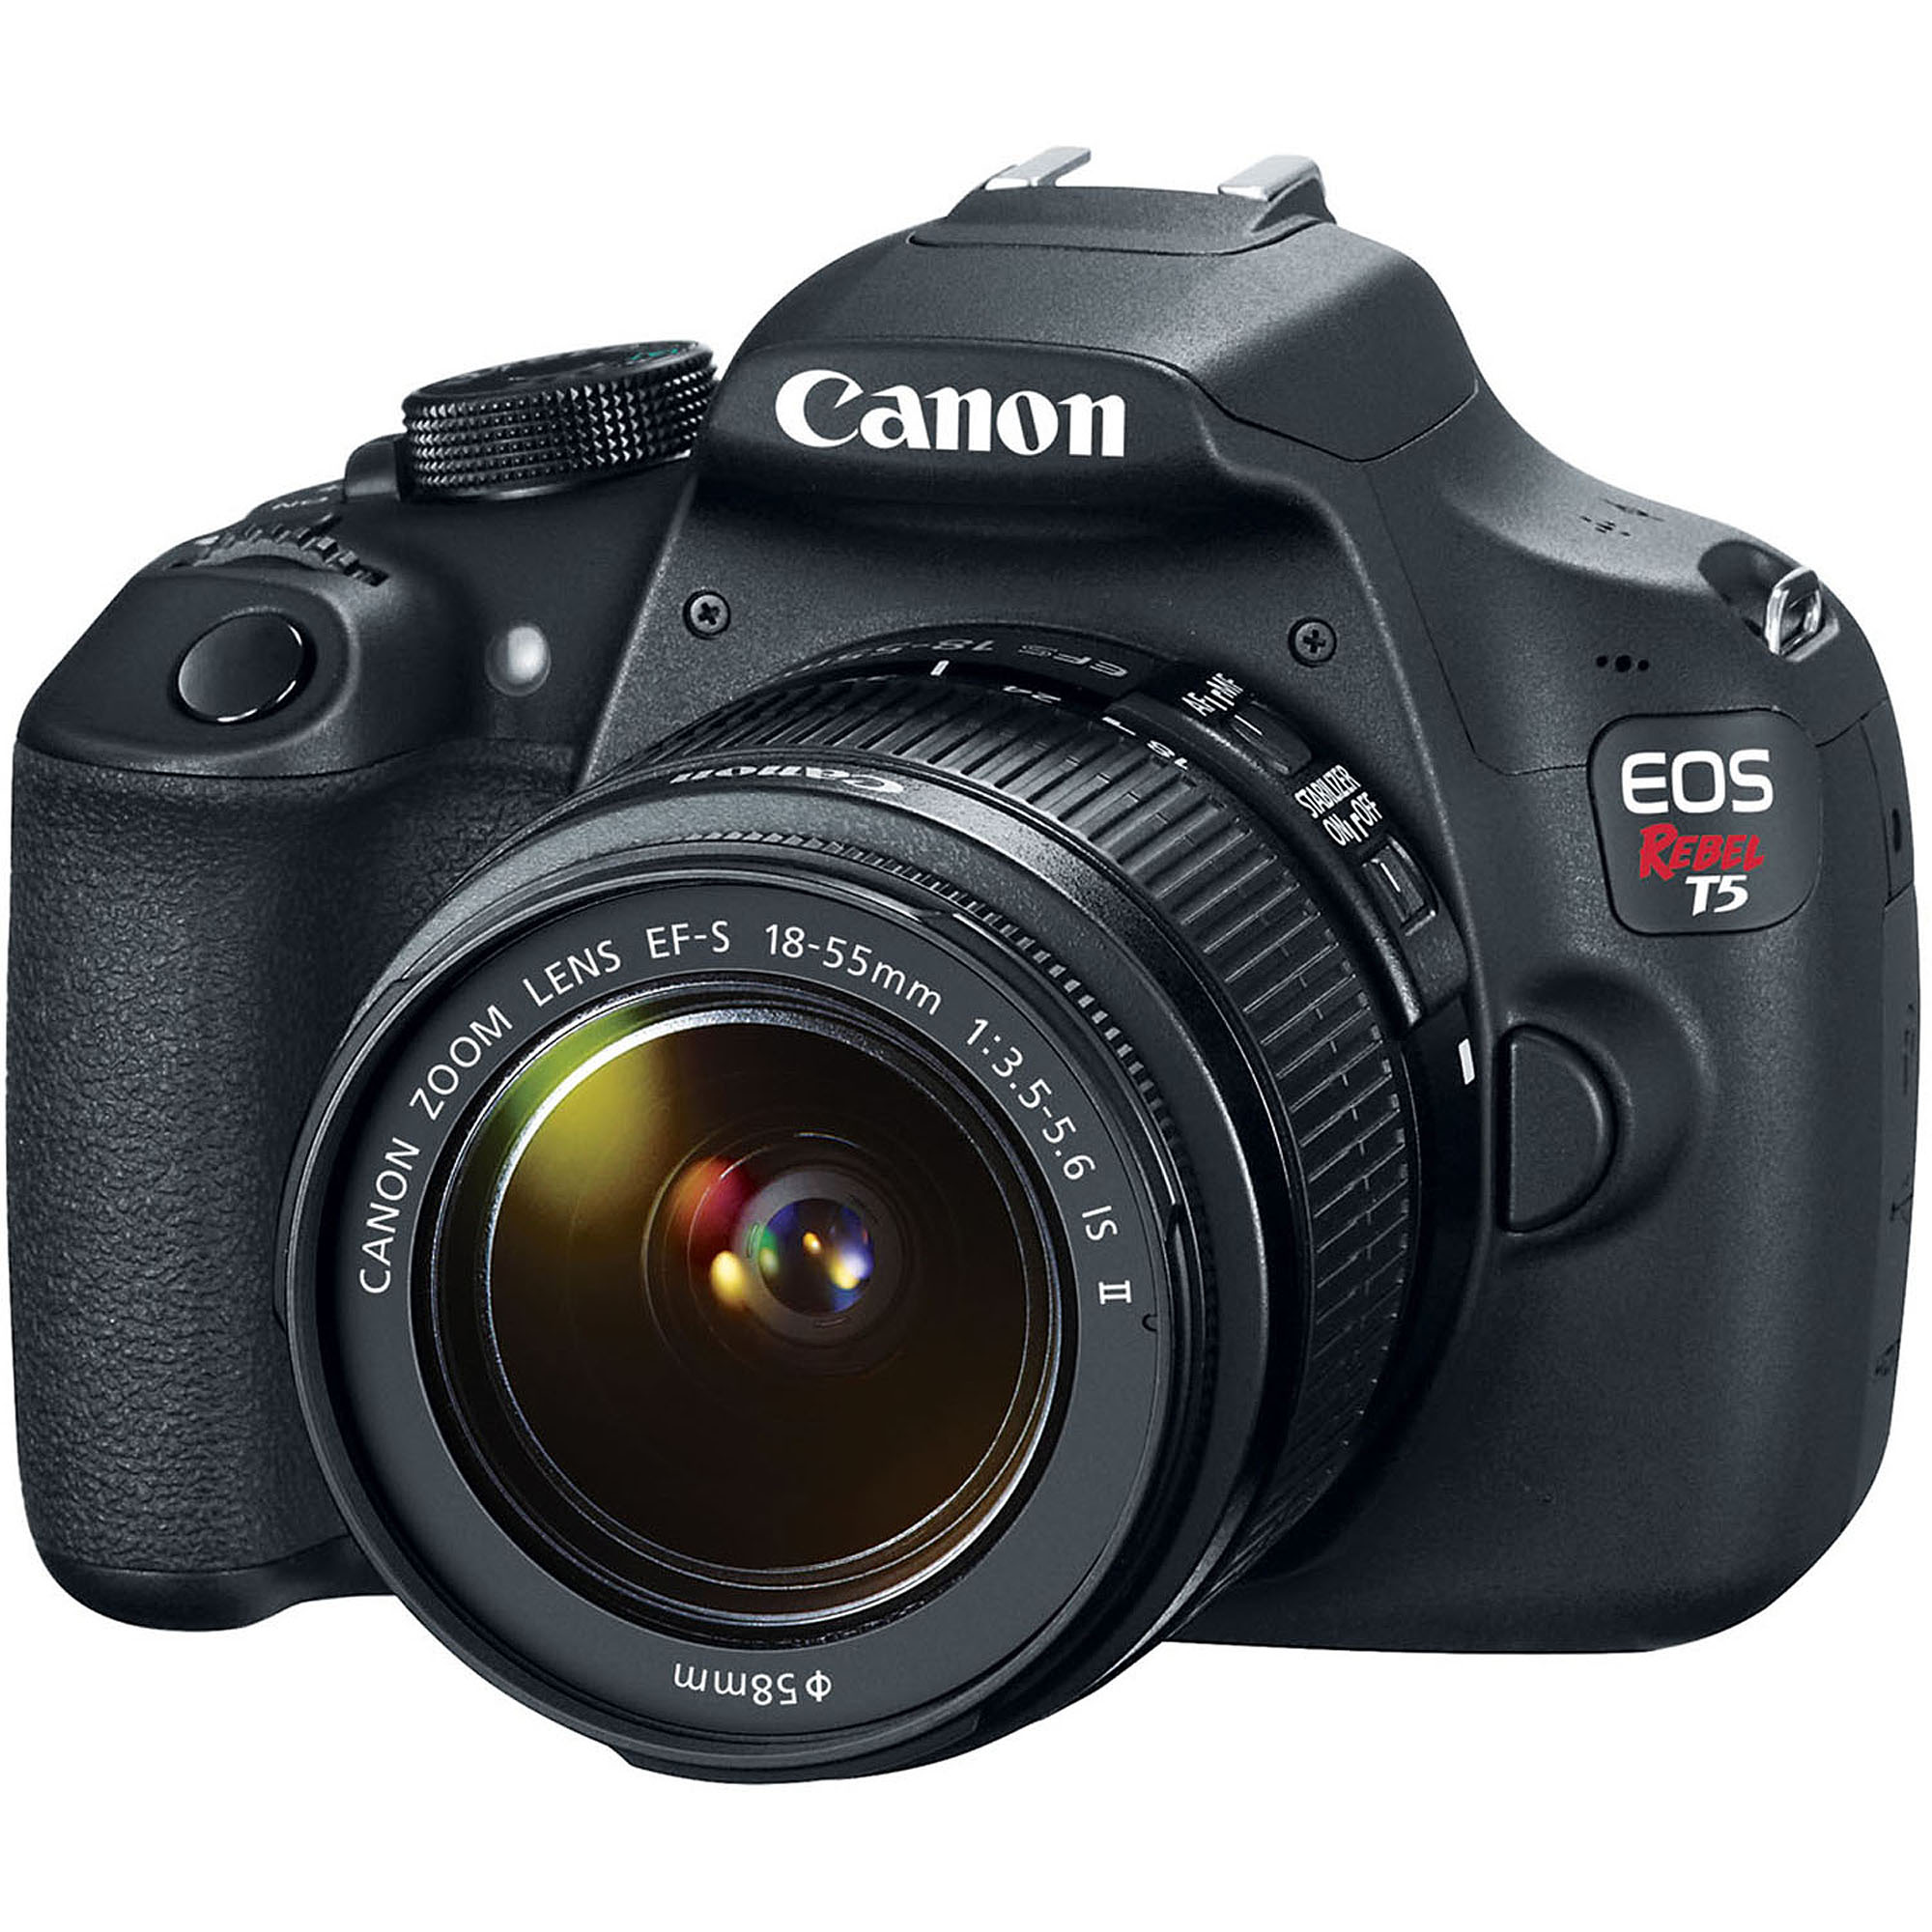 Canon Eos Rebel T5 Ef-s18-55mm Is Ii Kit - image 2 of 8